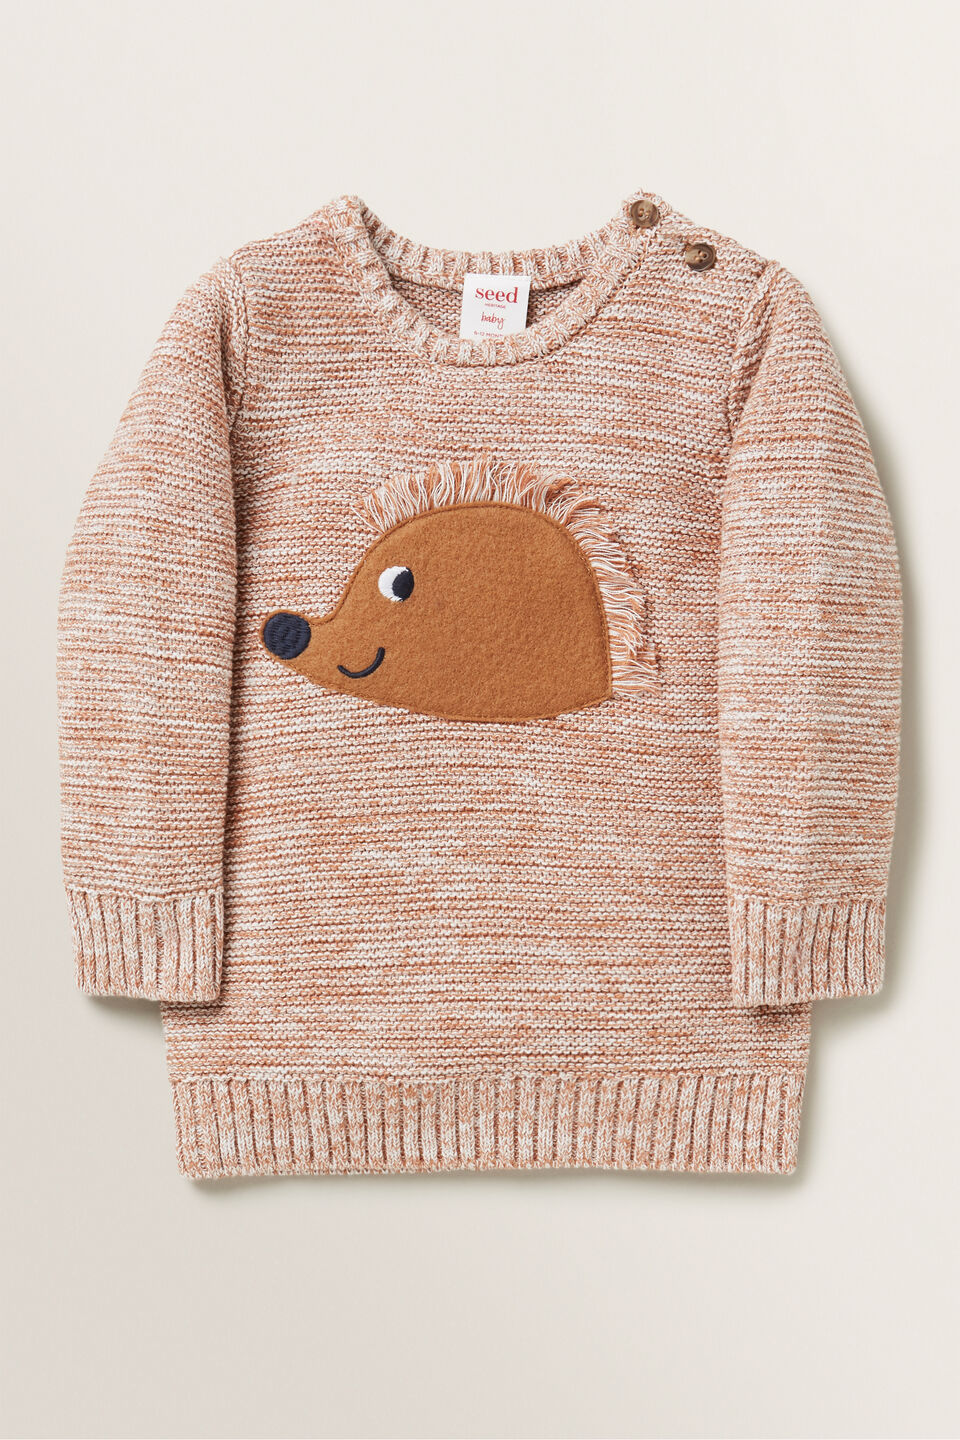 Hedgehog Knitted Sweater  